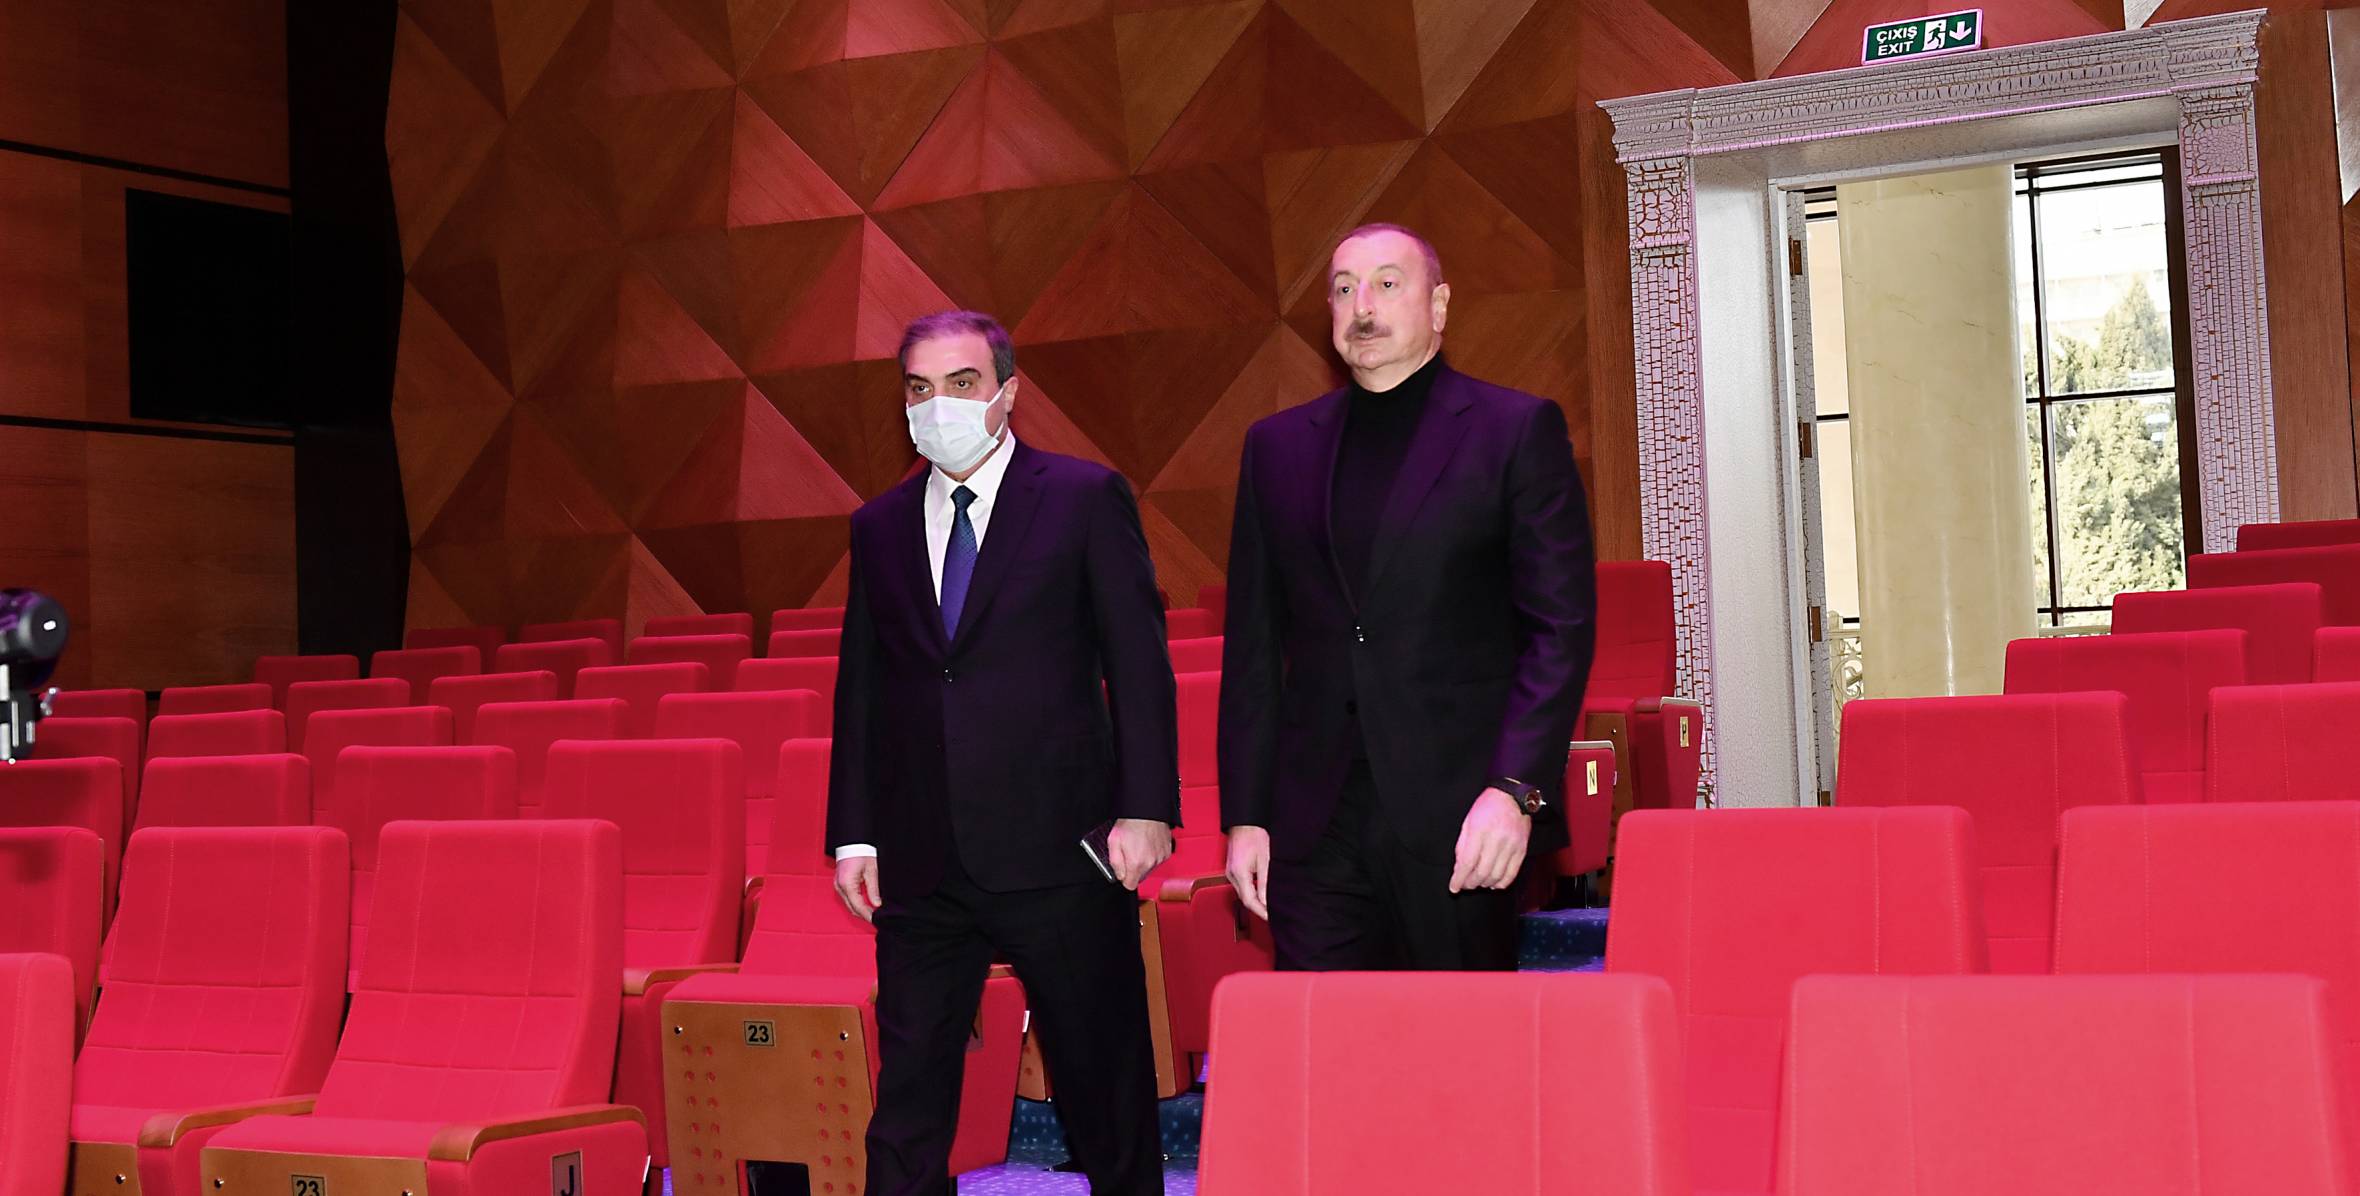 Ilham Aliyev attended the inauguration of the new building of Gandja State Drama Theatre